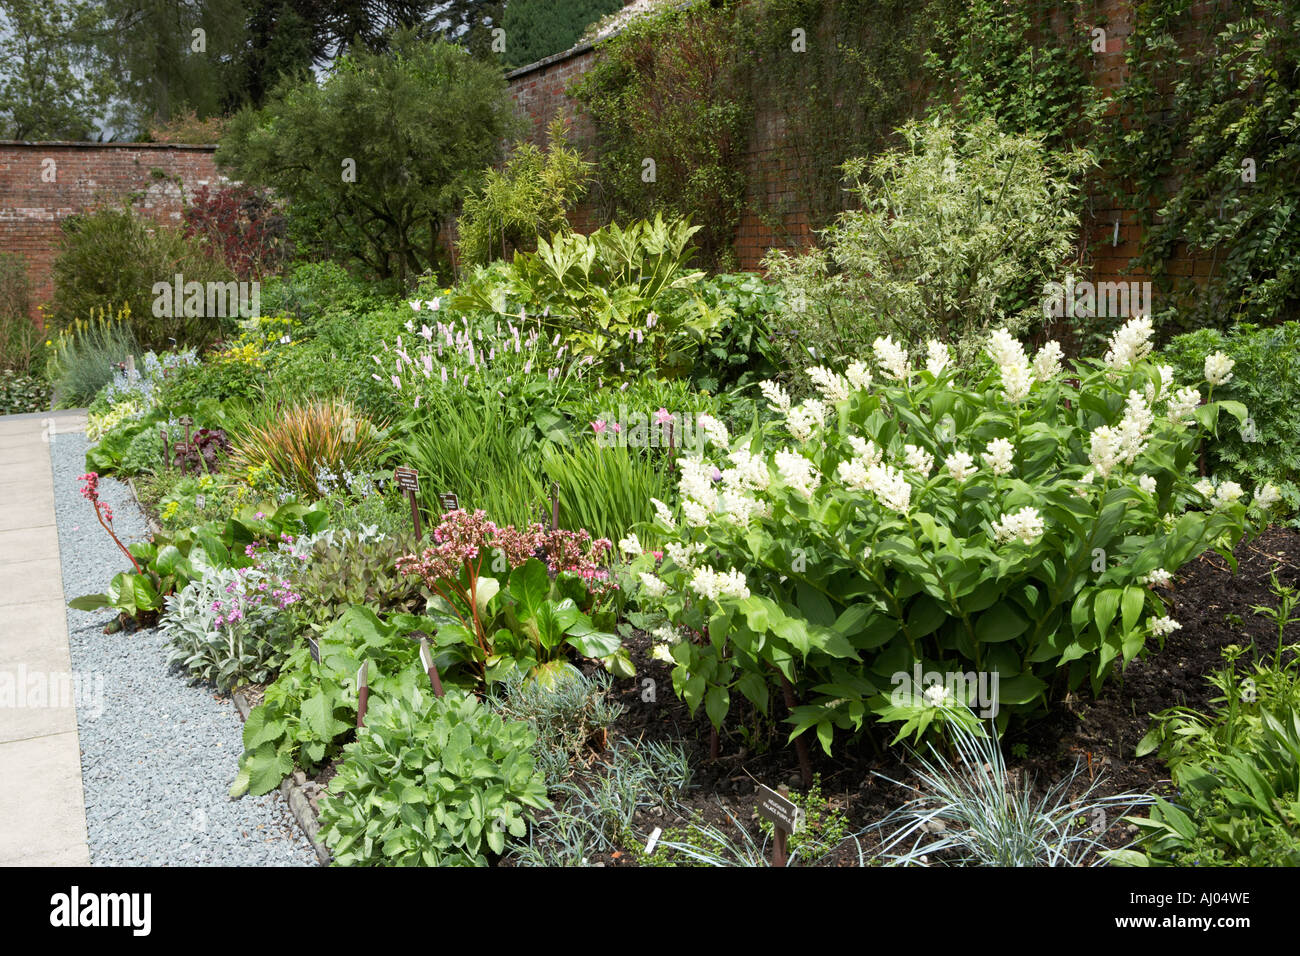 Holehird garden Windermere large bed with the white flowering shrub Smilacina racemosa in foreground Stock Photo